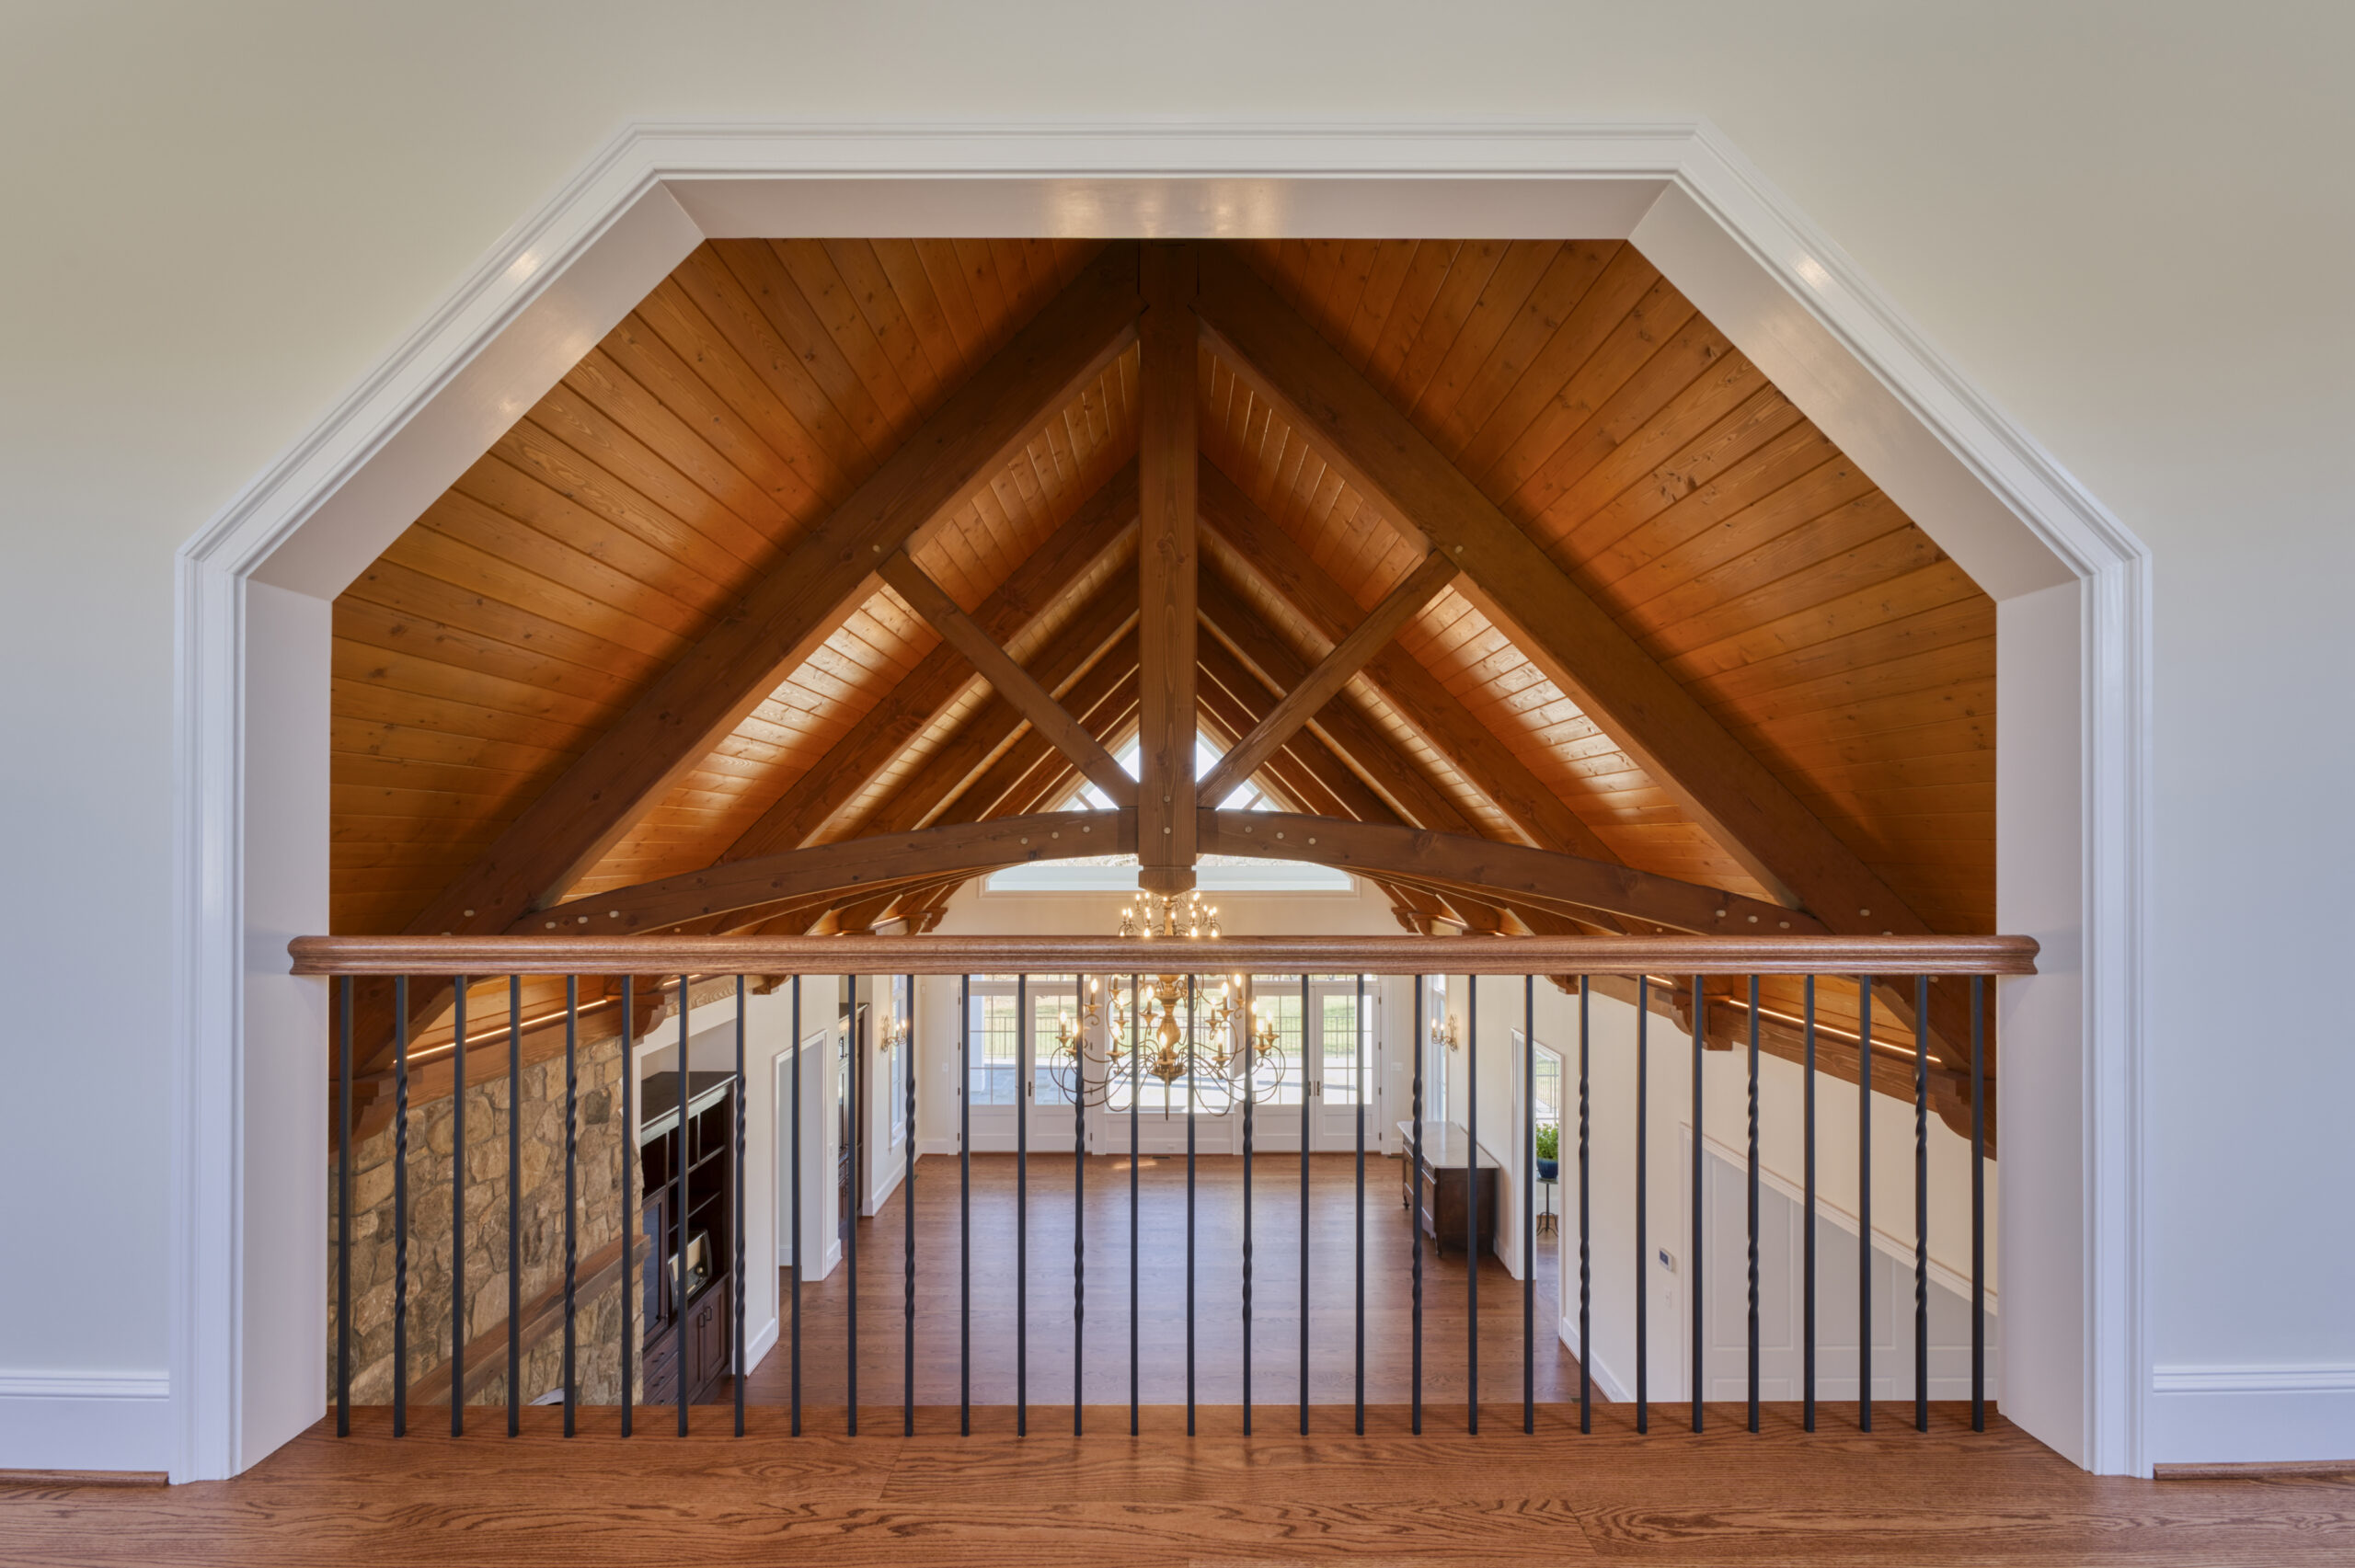 Professional interior photo of custom build new home by Black Oak Construction - showing the great room from the upper room overlooking, with hardwood floors, vaulted wooden ceiling with wooden trusses, stone fireplace and built-in cabinets on either side